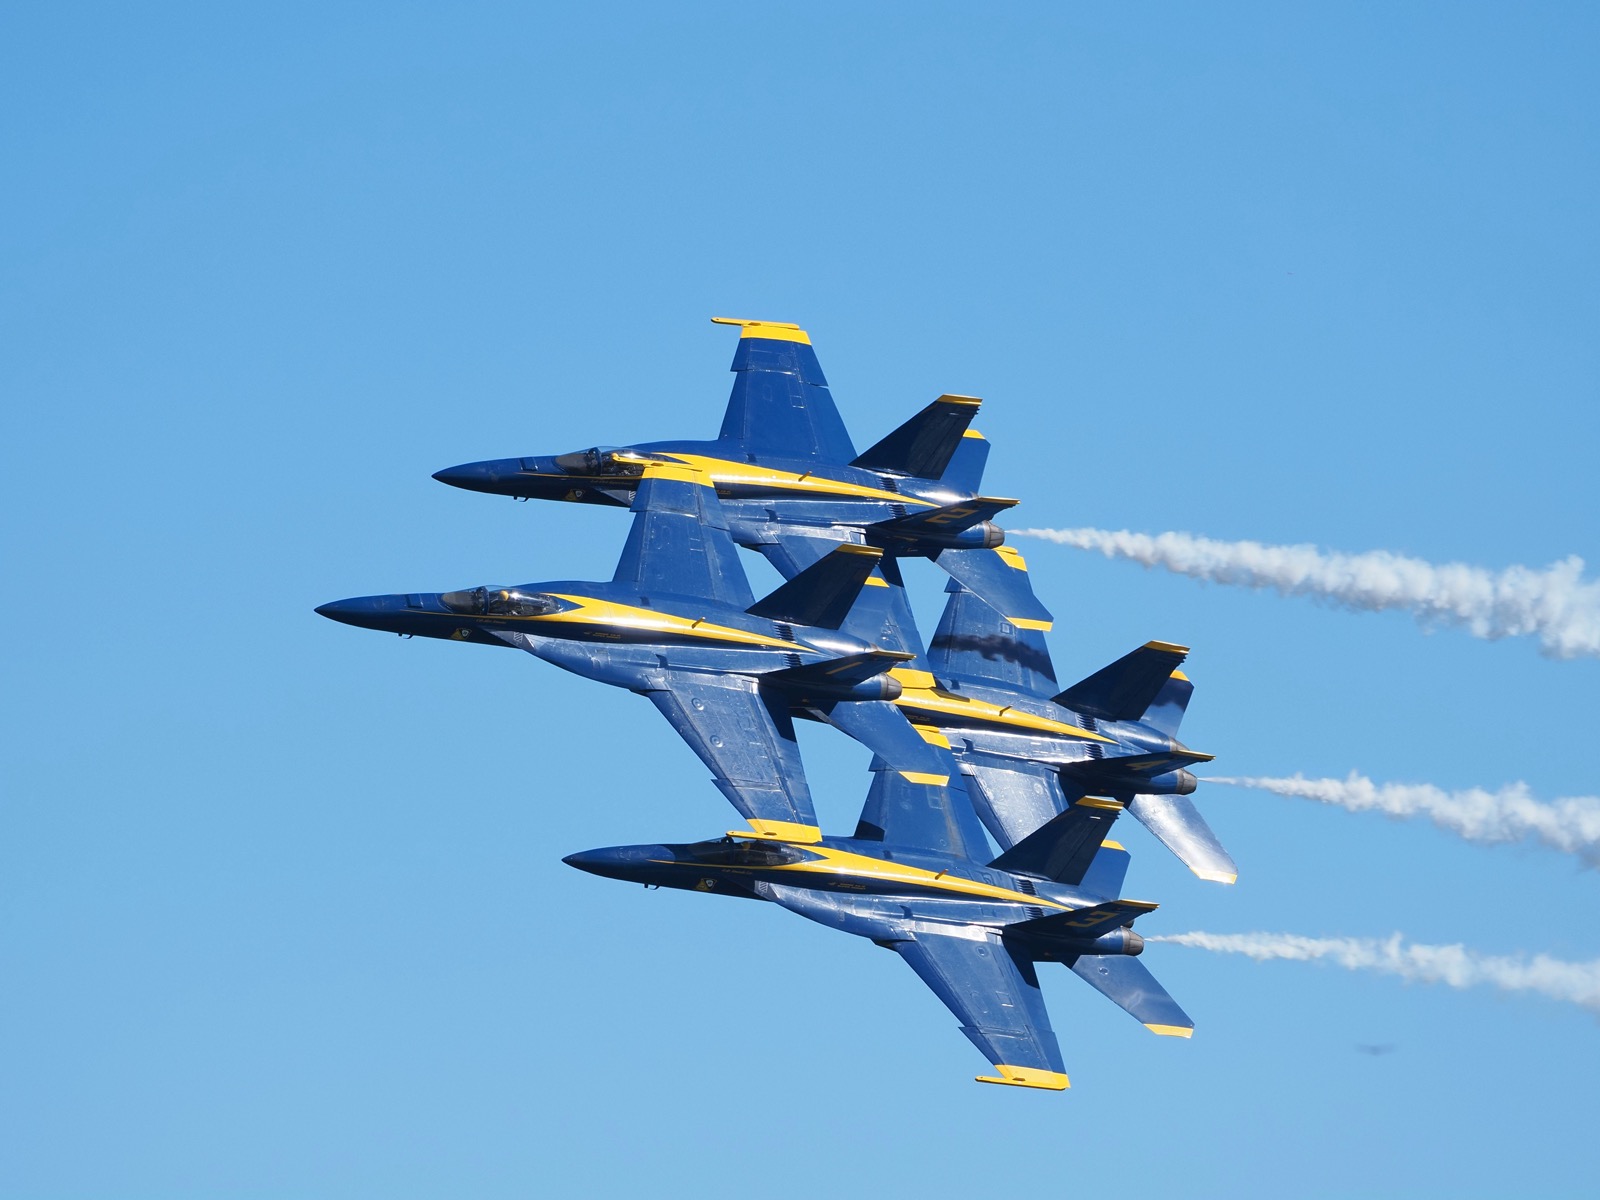 Four Blue Angel F-18 aircraft in a tight diamond formation